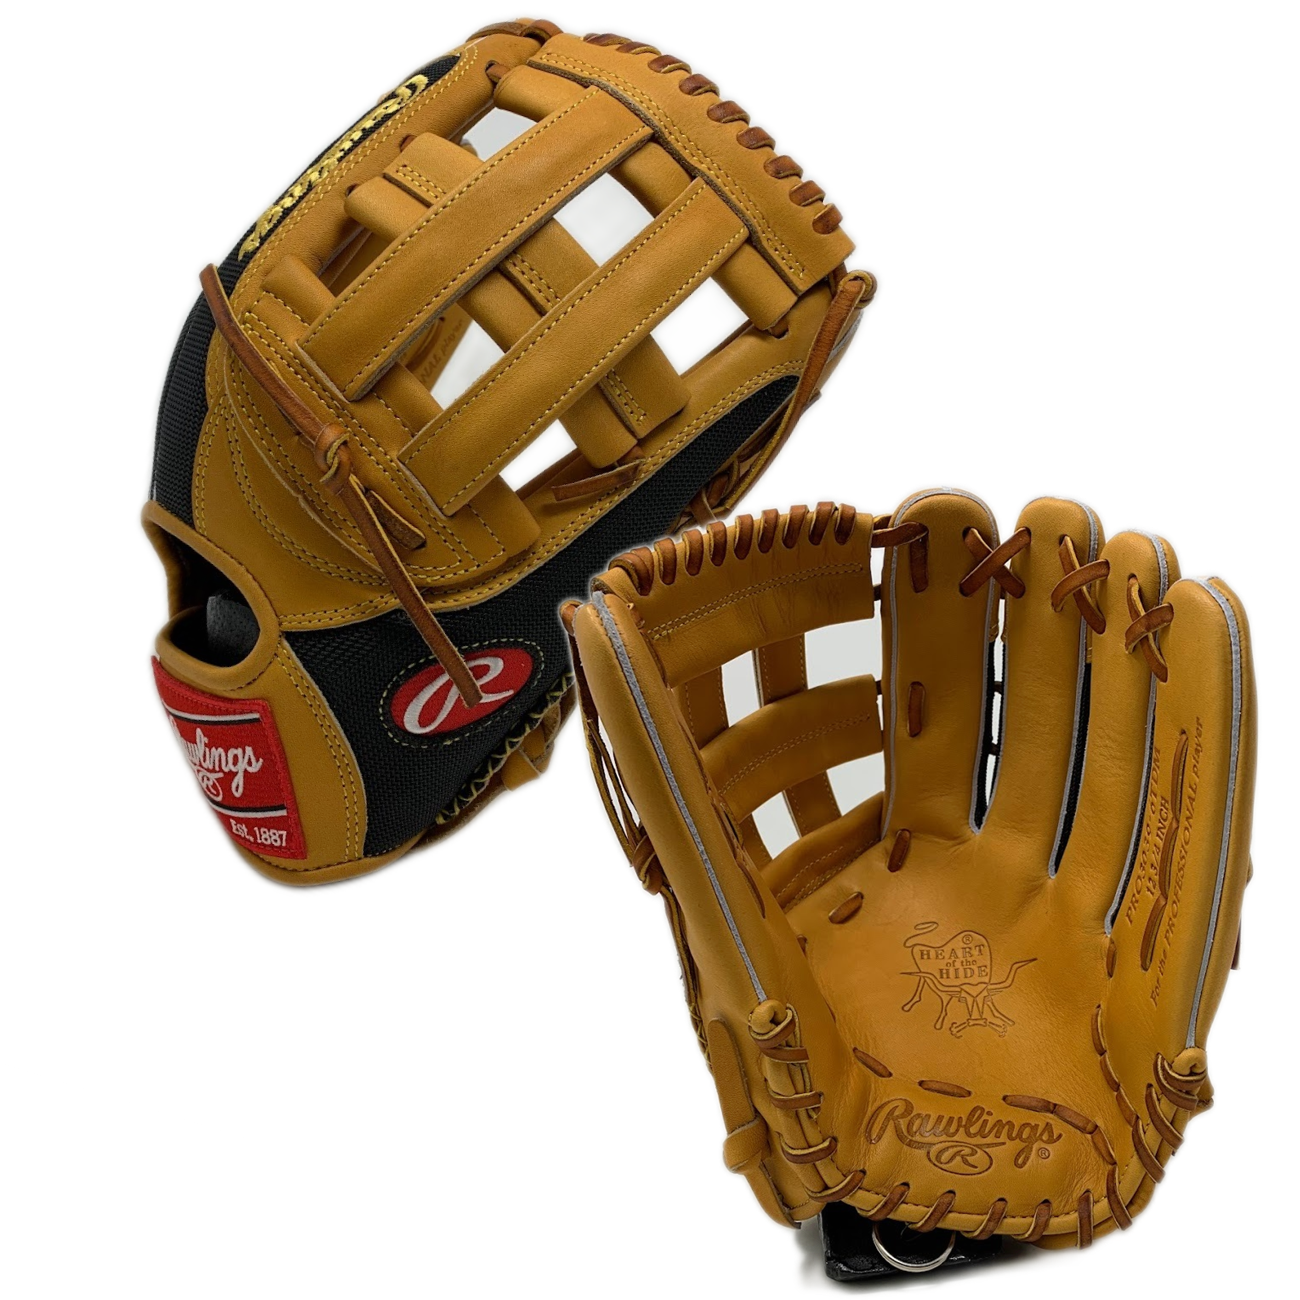   Constructed from Rawlings' world-renowned Heart of the Hide steer leather and deco mesh back the 303 pattern from Rawlings is one of their most popular outfield patterns. Lighter weight with the durability you expect with Rawlings best in class HOH leather. Premium leather cap finger tips to preserve the shape of the glove and extend the life of the glove. Rawlings patented deerskin liner for a comfortable feel on the hand and thermoformed wrist which both wicks away moisture and is easy to clean/maintain.  12 ¾ Inch  Pro H Web  Deco Mesh Back  303 Pattern  Hand Sewn Welt Deer Tanned Cowhide Lining Padded Thumb       When it comes to baseball gloves, Rawlings is a name that is synonymous with quality and durability. One of their flagship lines is the Heart of the Hide Mesh series, which features gloves made with their best-in-class leather and light-weight mesh backing. This leather is not only durable, but it is also lightweight, making it a popular choice among players who want to have more control and speed with their glove. One of the key features of this series of Heart of the Hide is the premium leather cap finger tips. These finger tips are designed to preserve the shape of the glove and extend its life. This is achieved by reinforcing the tips of the fingers, which are typically the first areas to wear down on a glove. The result is a glove that maintains its shape and performs like new for longer. Another unique feature of the Heart of the Hide series is the Rawlings patented deerskin liner. This liner is designed for a comfortable feel on the hand and is made from cowhide that has been tanned using a special process. This liner is also thermoformed, which means that it has been shaped using heat. This process not only makes the liner more comfortable, but it also helps to wick away moisture and makes it easier to clean and maintain. The Heart of the Hide series also features padded thumb loops, which are tailored to appeal to the classic glove connoisseur as well as all players. These padded thumb loops provide added comfort and are a preferred alternative to the traditional leather thumb loops inside the glove. Another feature of this Heart of the Hide series is the mesh back on the back of the gloves. This mesh back makes the gloves 15% lighter, which is preferred by players who want more control and speed with their glove. The Heart of the Hide Mesh series by Rawlings offers a combination of durability, comfort, and style. With features such as premium leather cap finger tips, Rawlings patented deerskin liner, padded thumb loops, and a mesh back, these gloves are designed to perform at the highest level while also providing a comfortable and secure fit. Whether you are a classic glove connoisseur or a player looking for a top-of-the-line glove, the Heart of the Hide series is an excellent choice.  